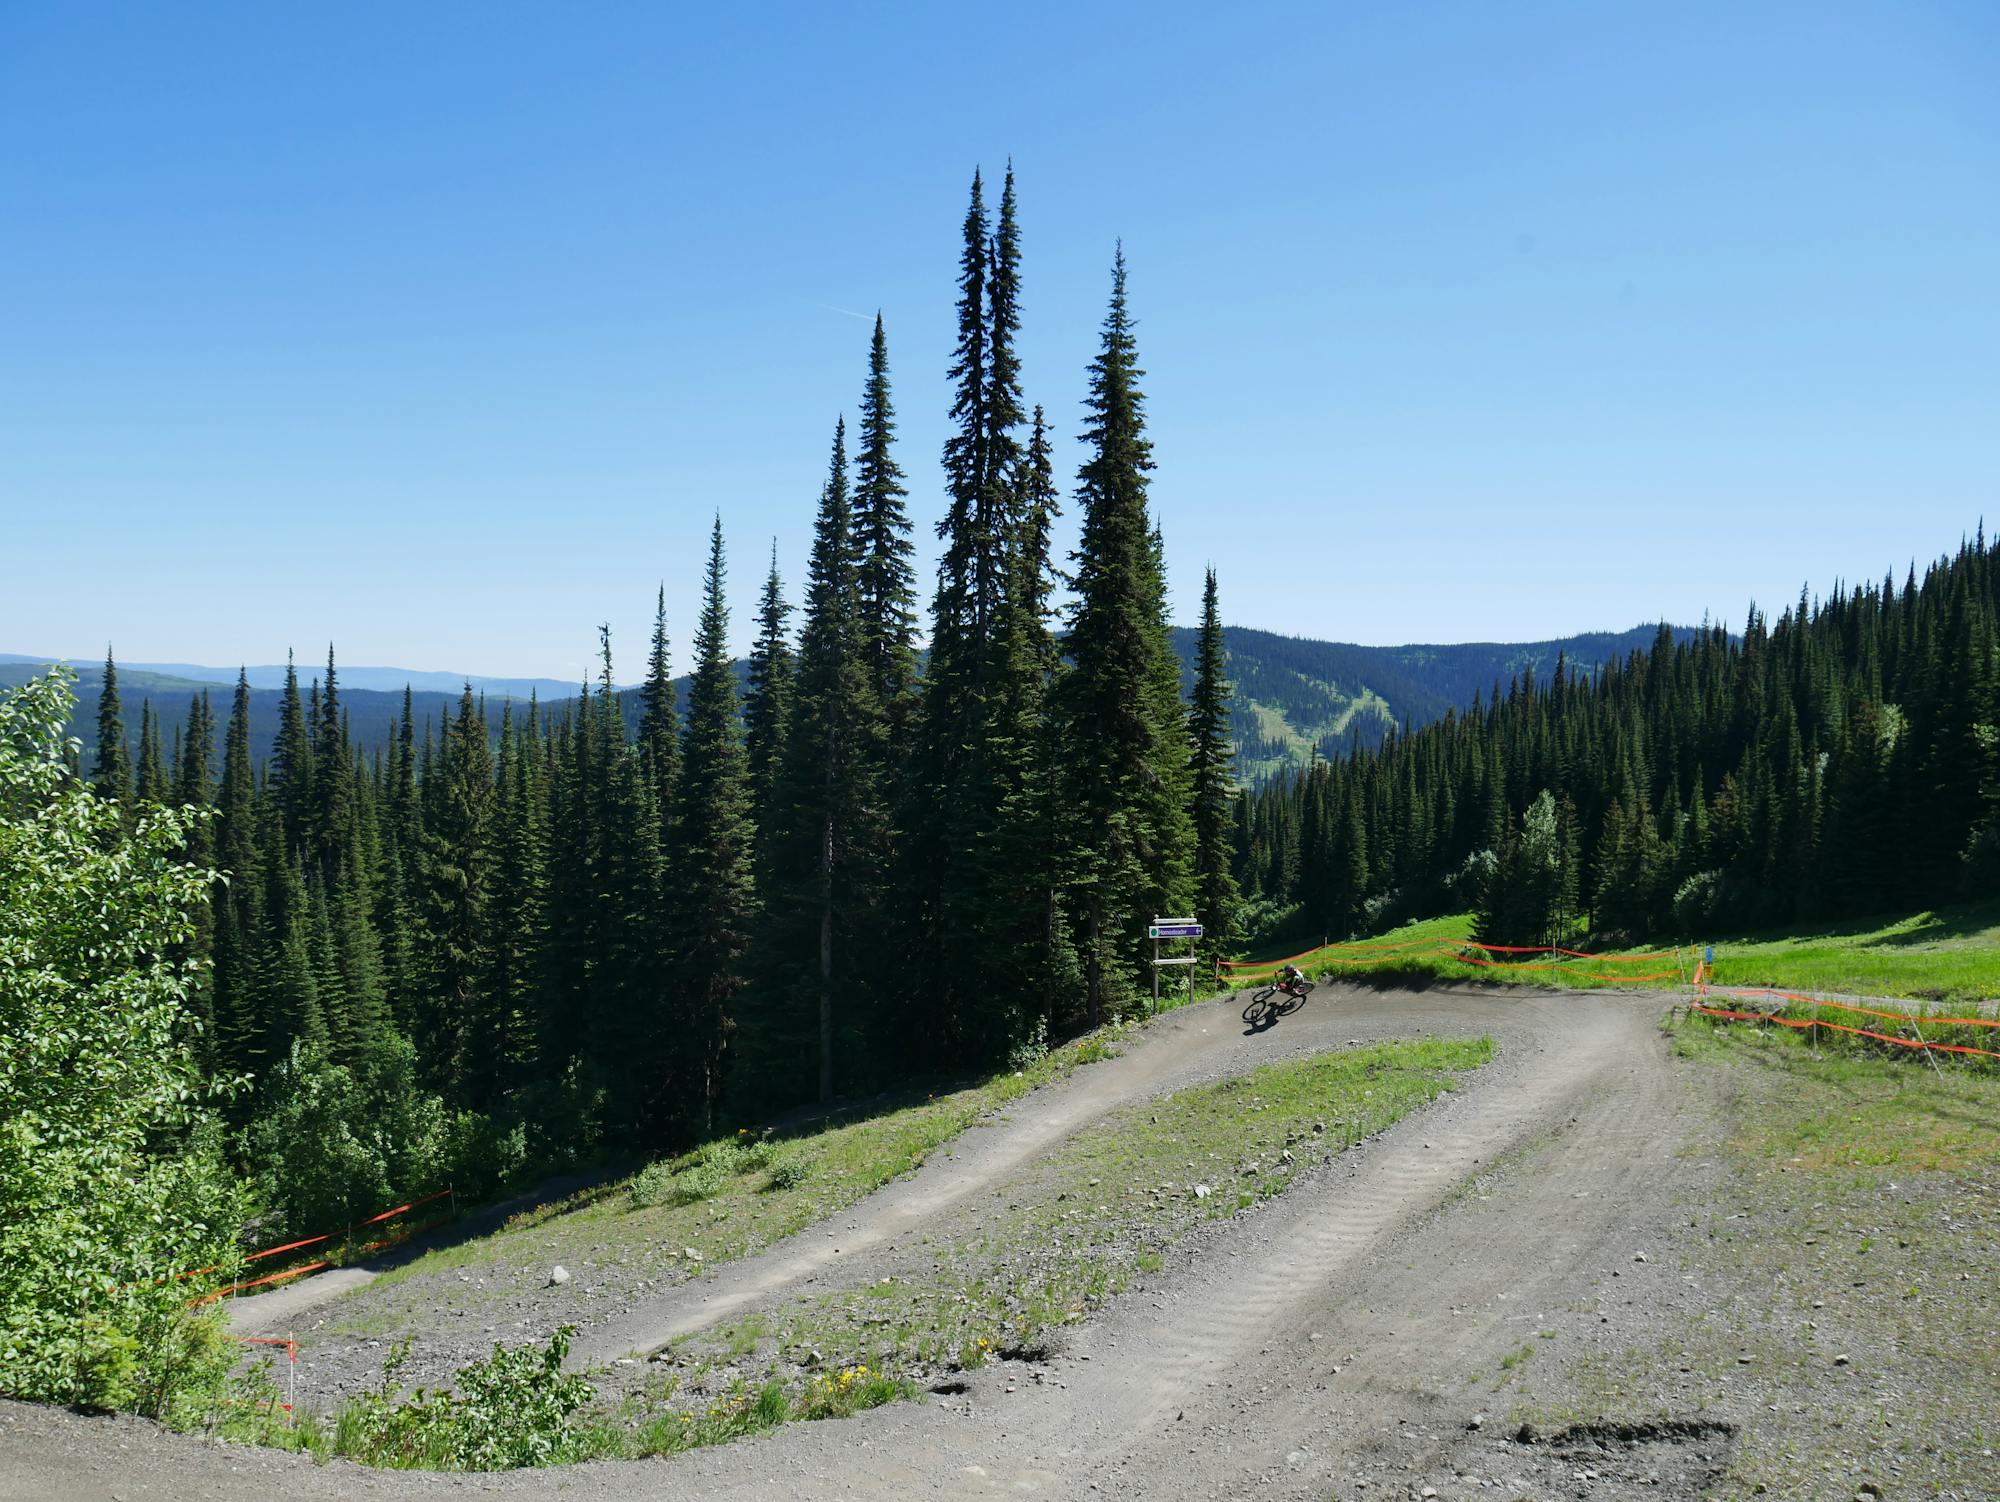 The most scenic berm at Sun Peaks?